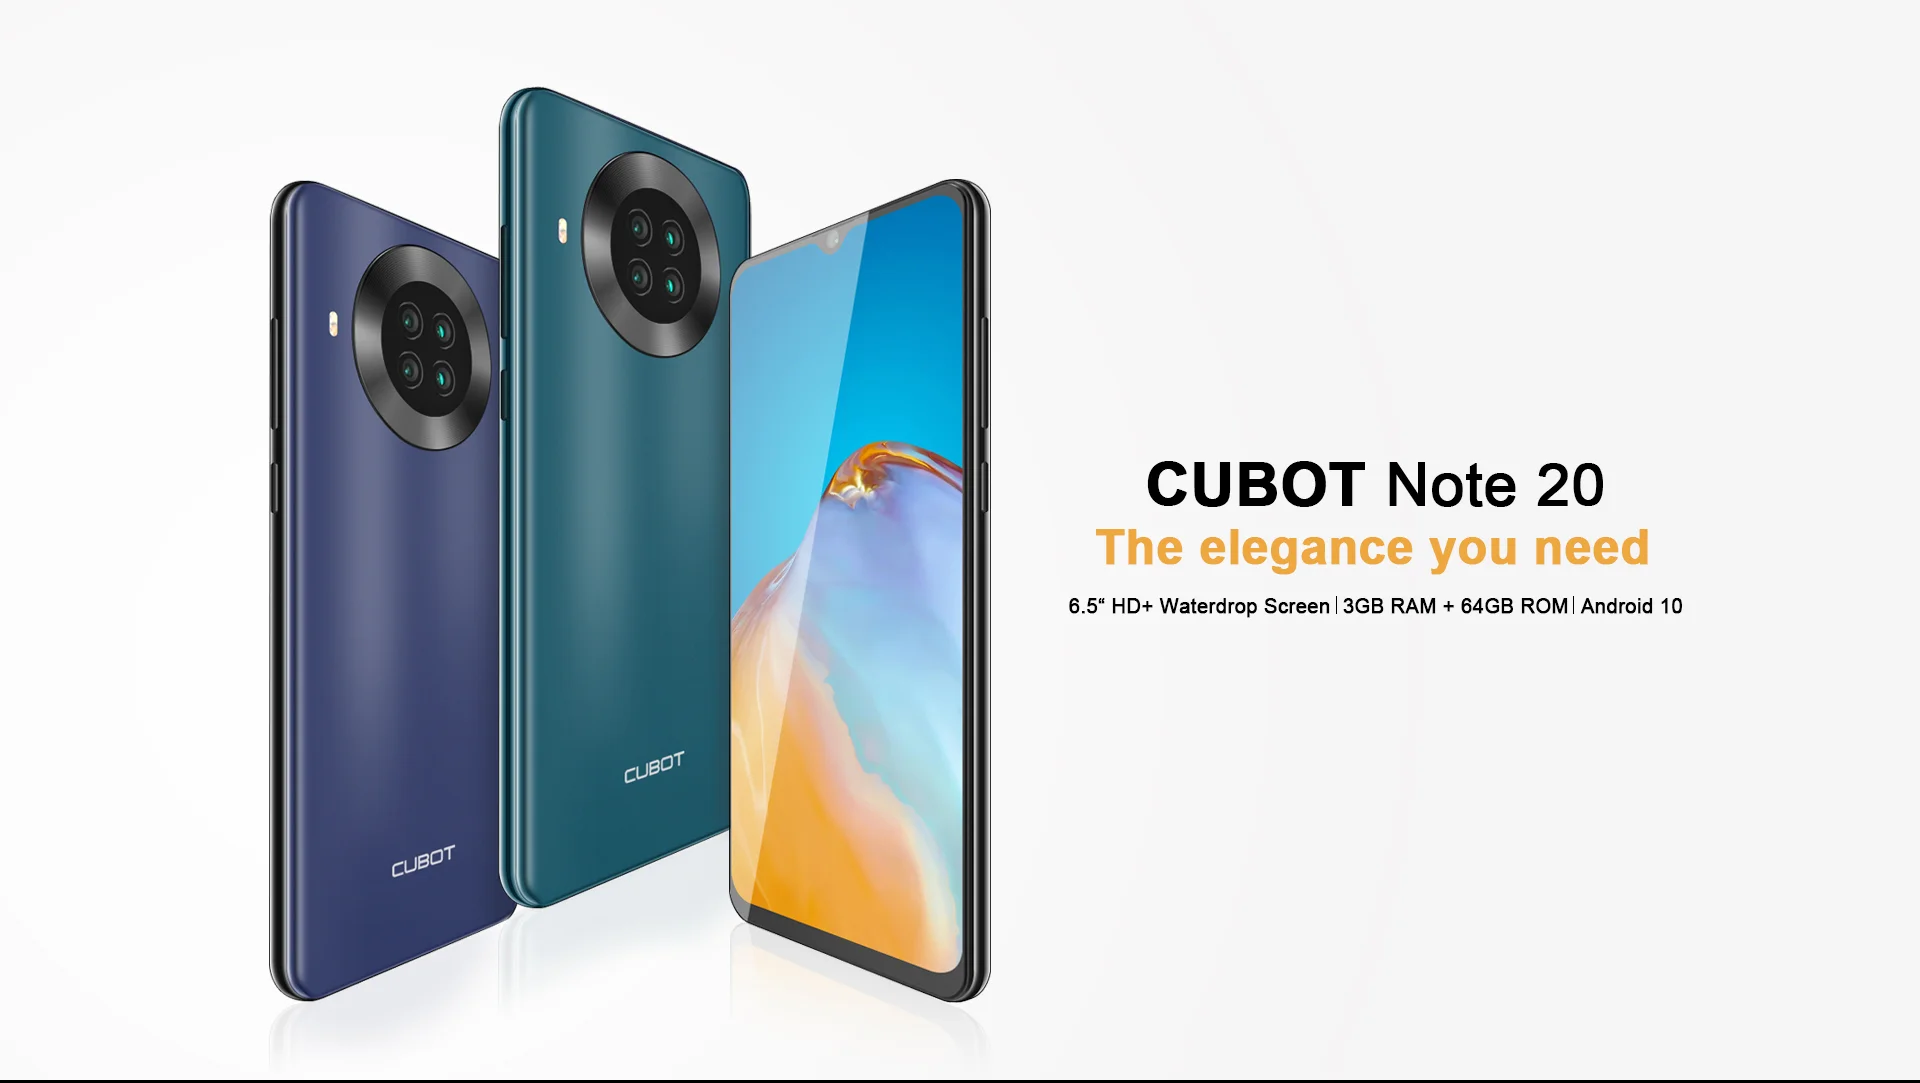 CUBOT Note 20